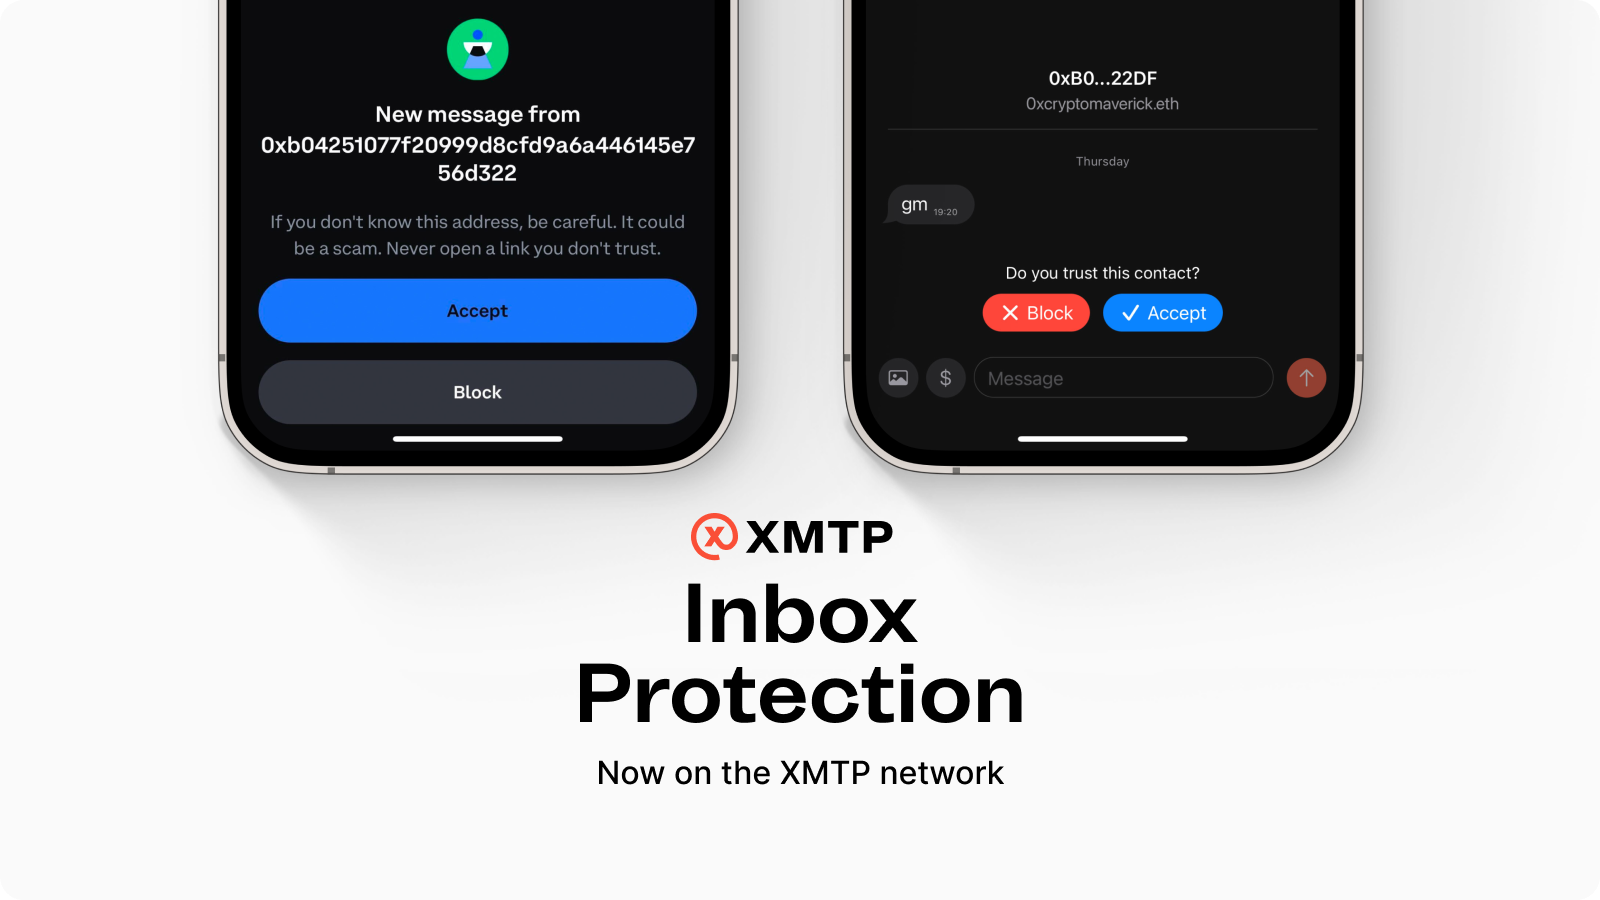 XMTP Inbox Protection illustrated using contact Accept and Block buttons in mobile apps